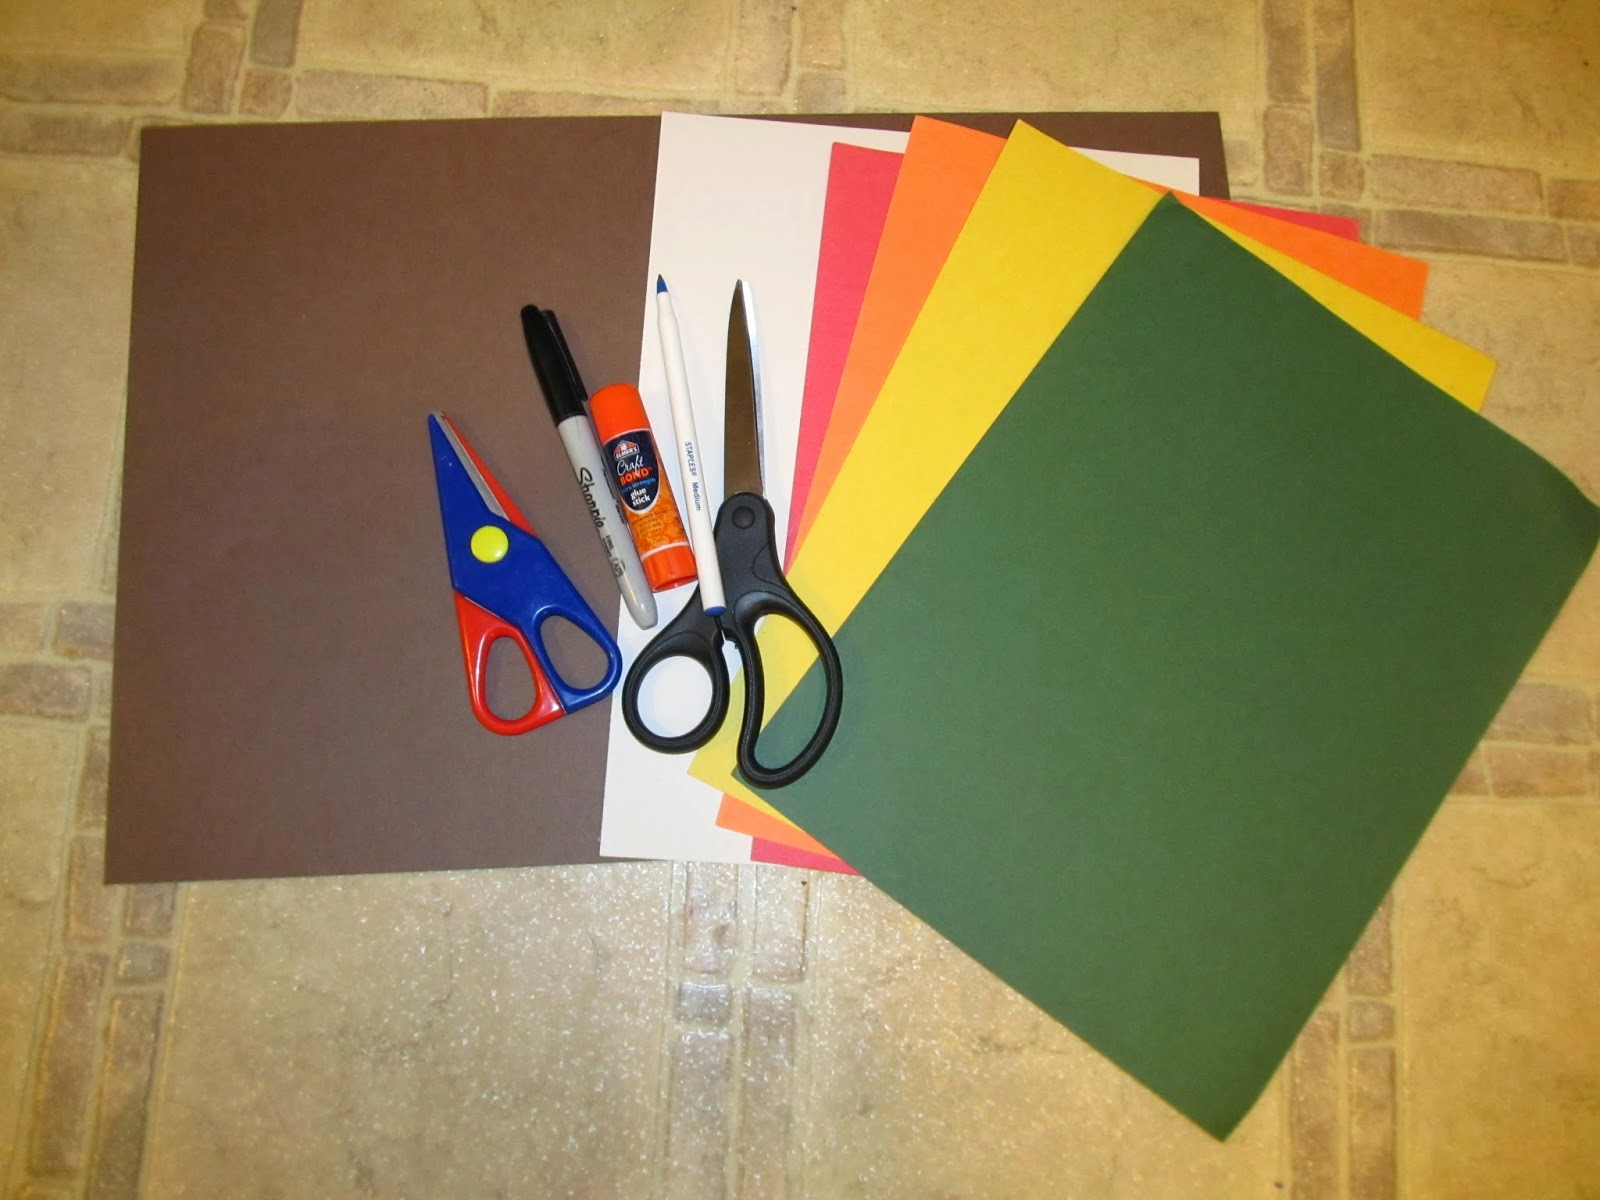 Construction Paper Crafts for Adults Inspirational Kitchen Floor Crafts Thankful Tree